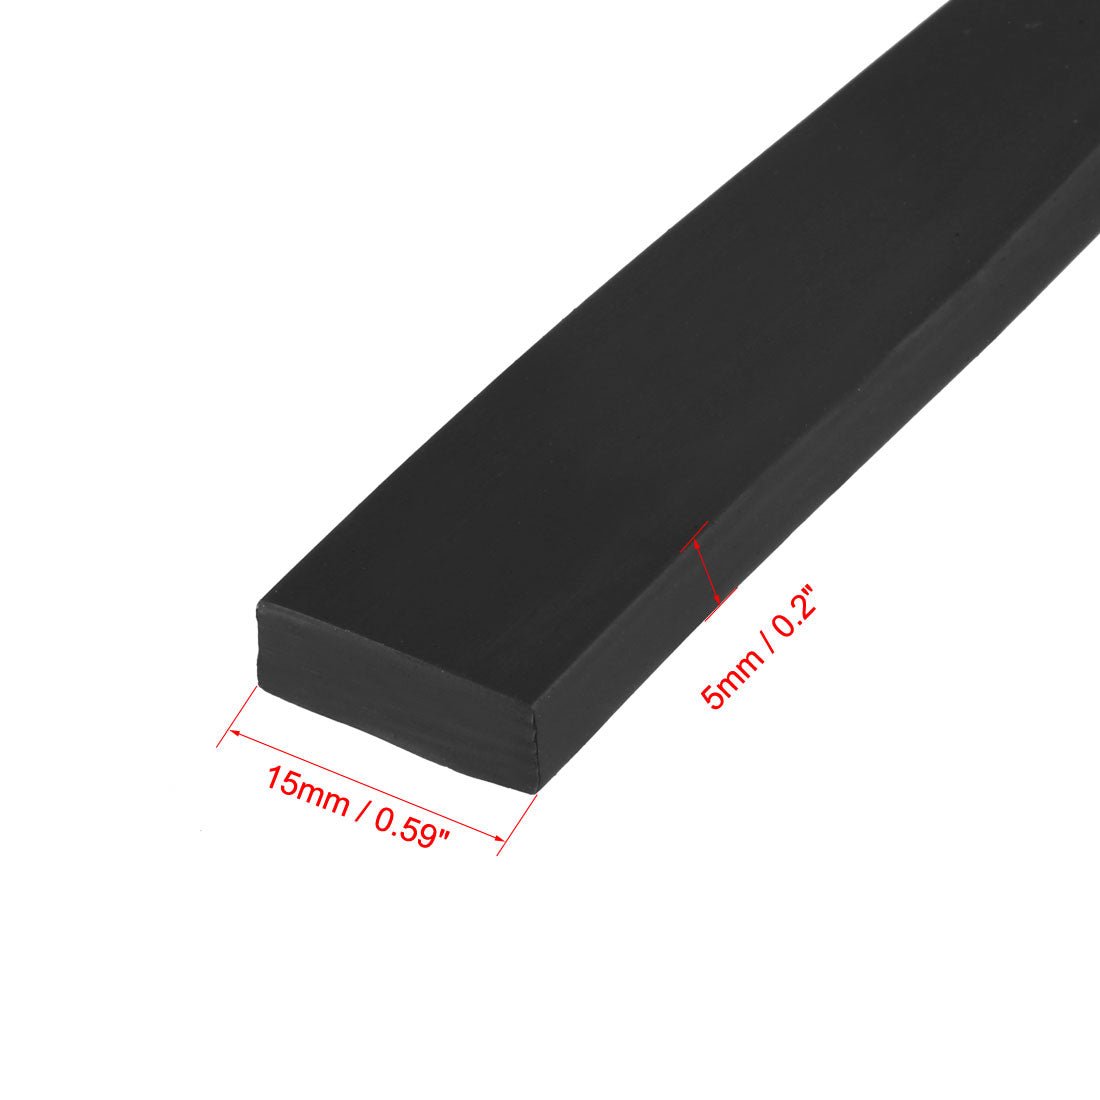 uxcell Uxcell Solid Rectangle Rubber Seal Strip 15mm Wide 5mm Thick, 3 Meters Long Black